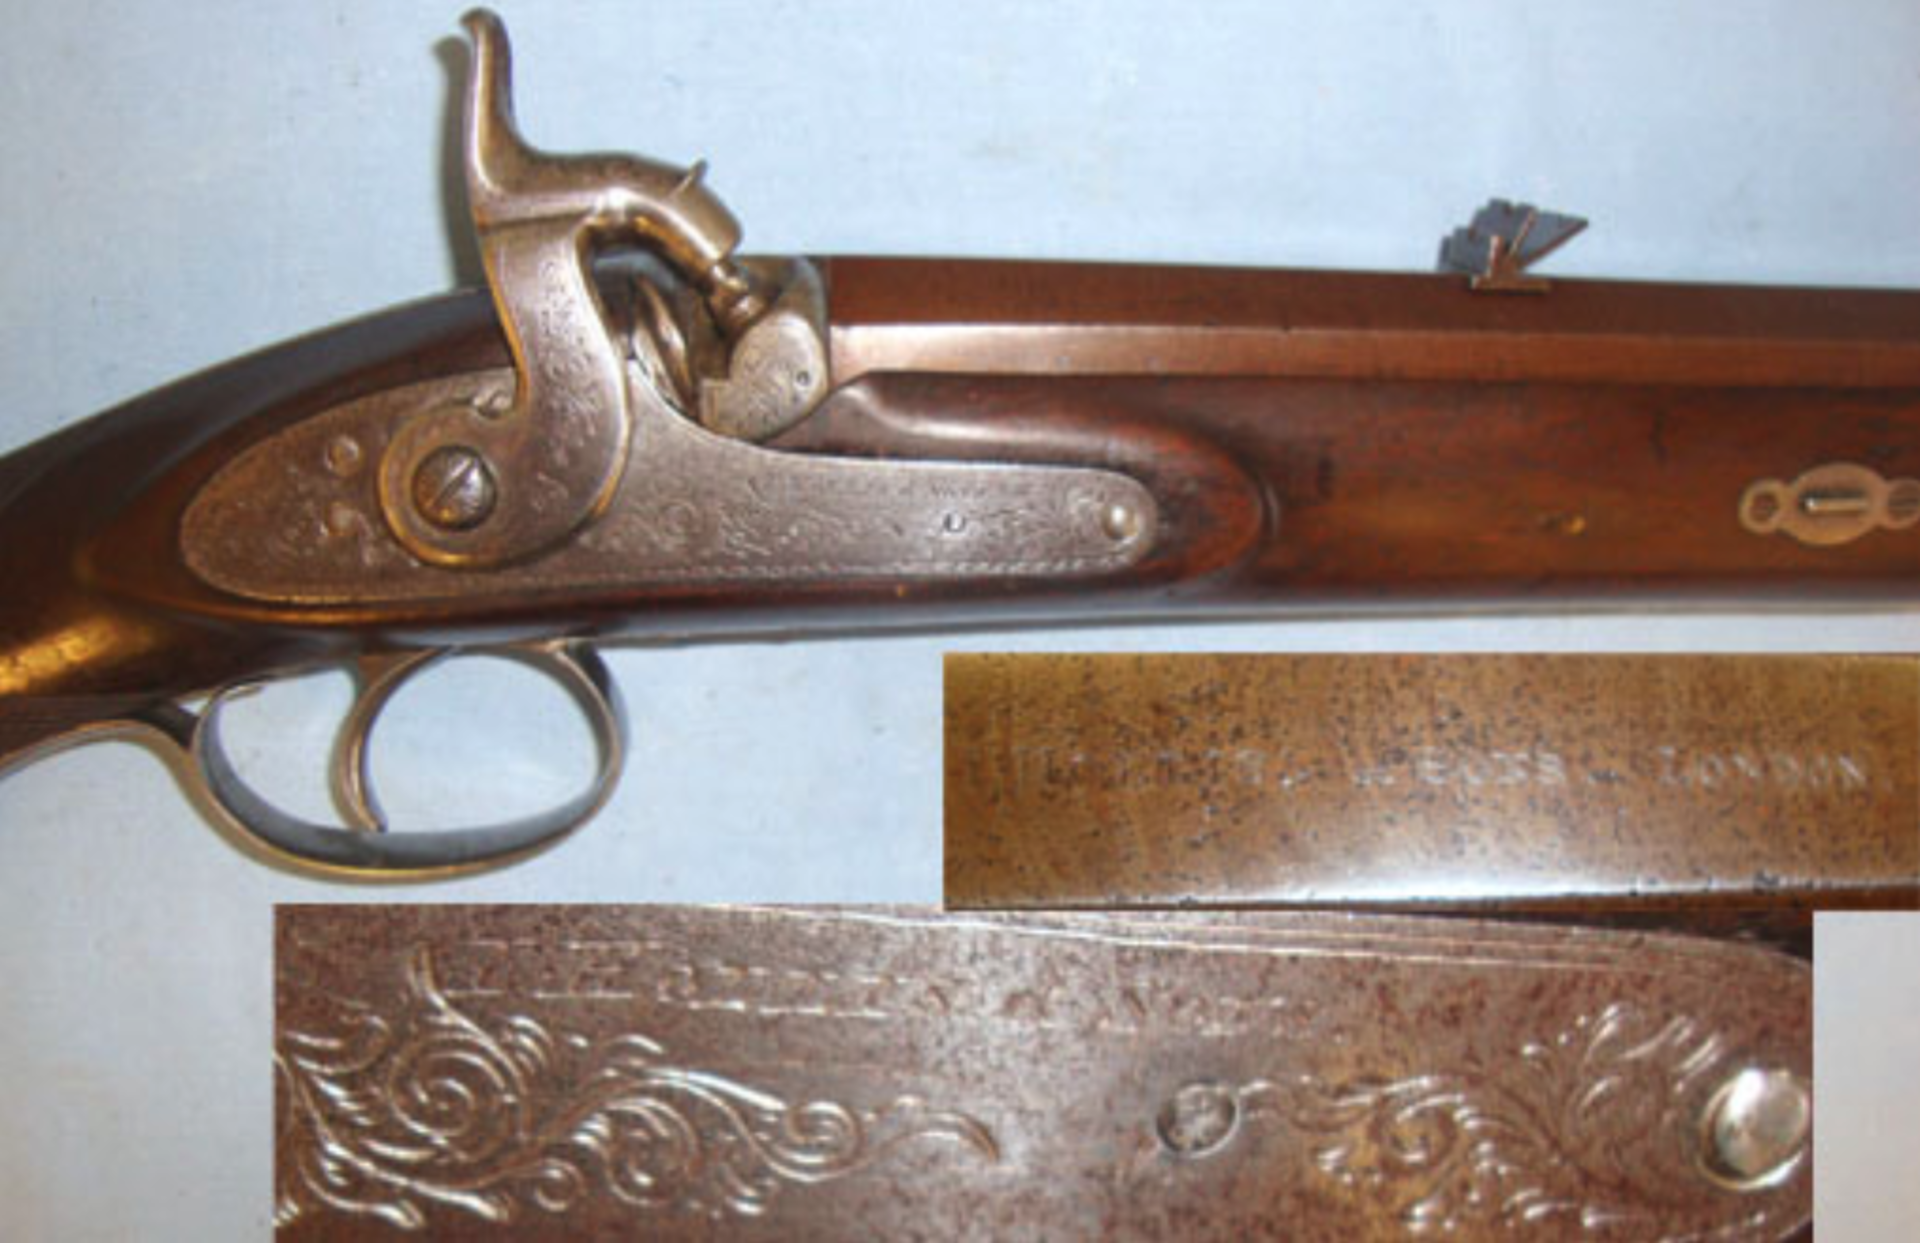 SUPERB, Victorian C1870 Isaac Hollis & Sons London .750' Bore Big Game Rifle With Octagonal Barrel - Image 2 of 3